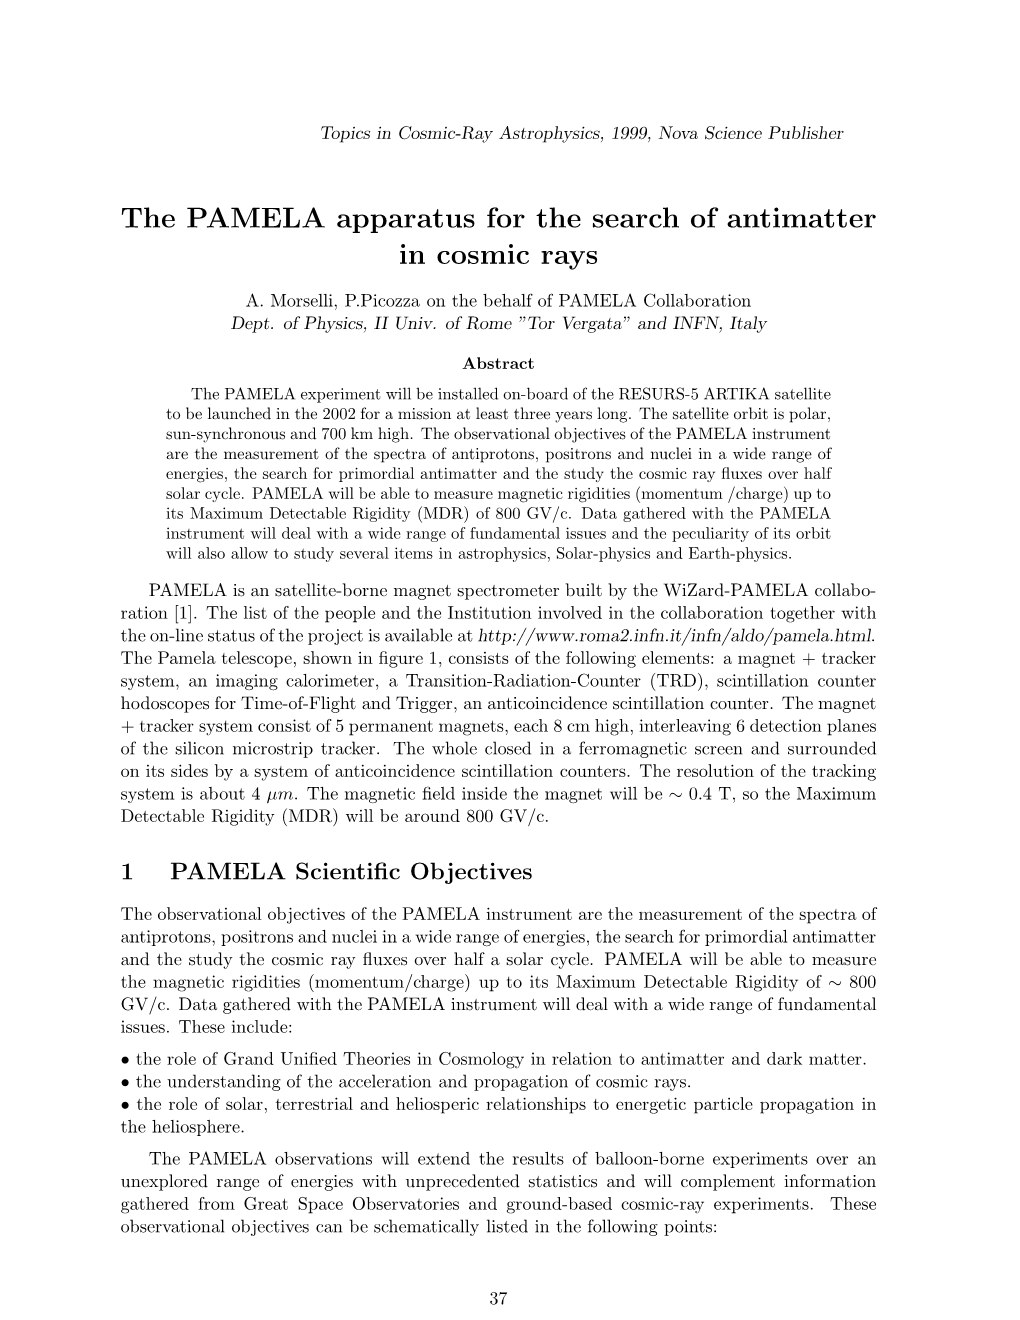 The PAMELA Apparatus for the Search of Antimatter in Cosmic Rays